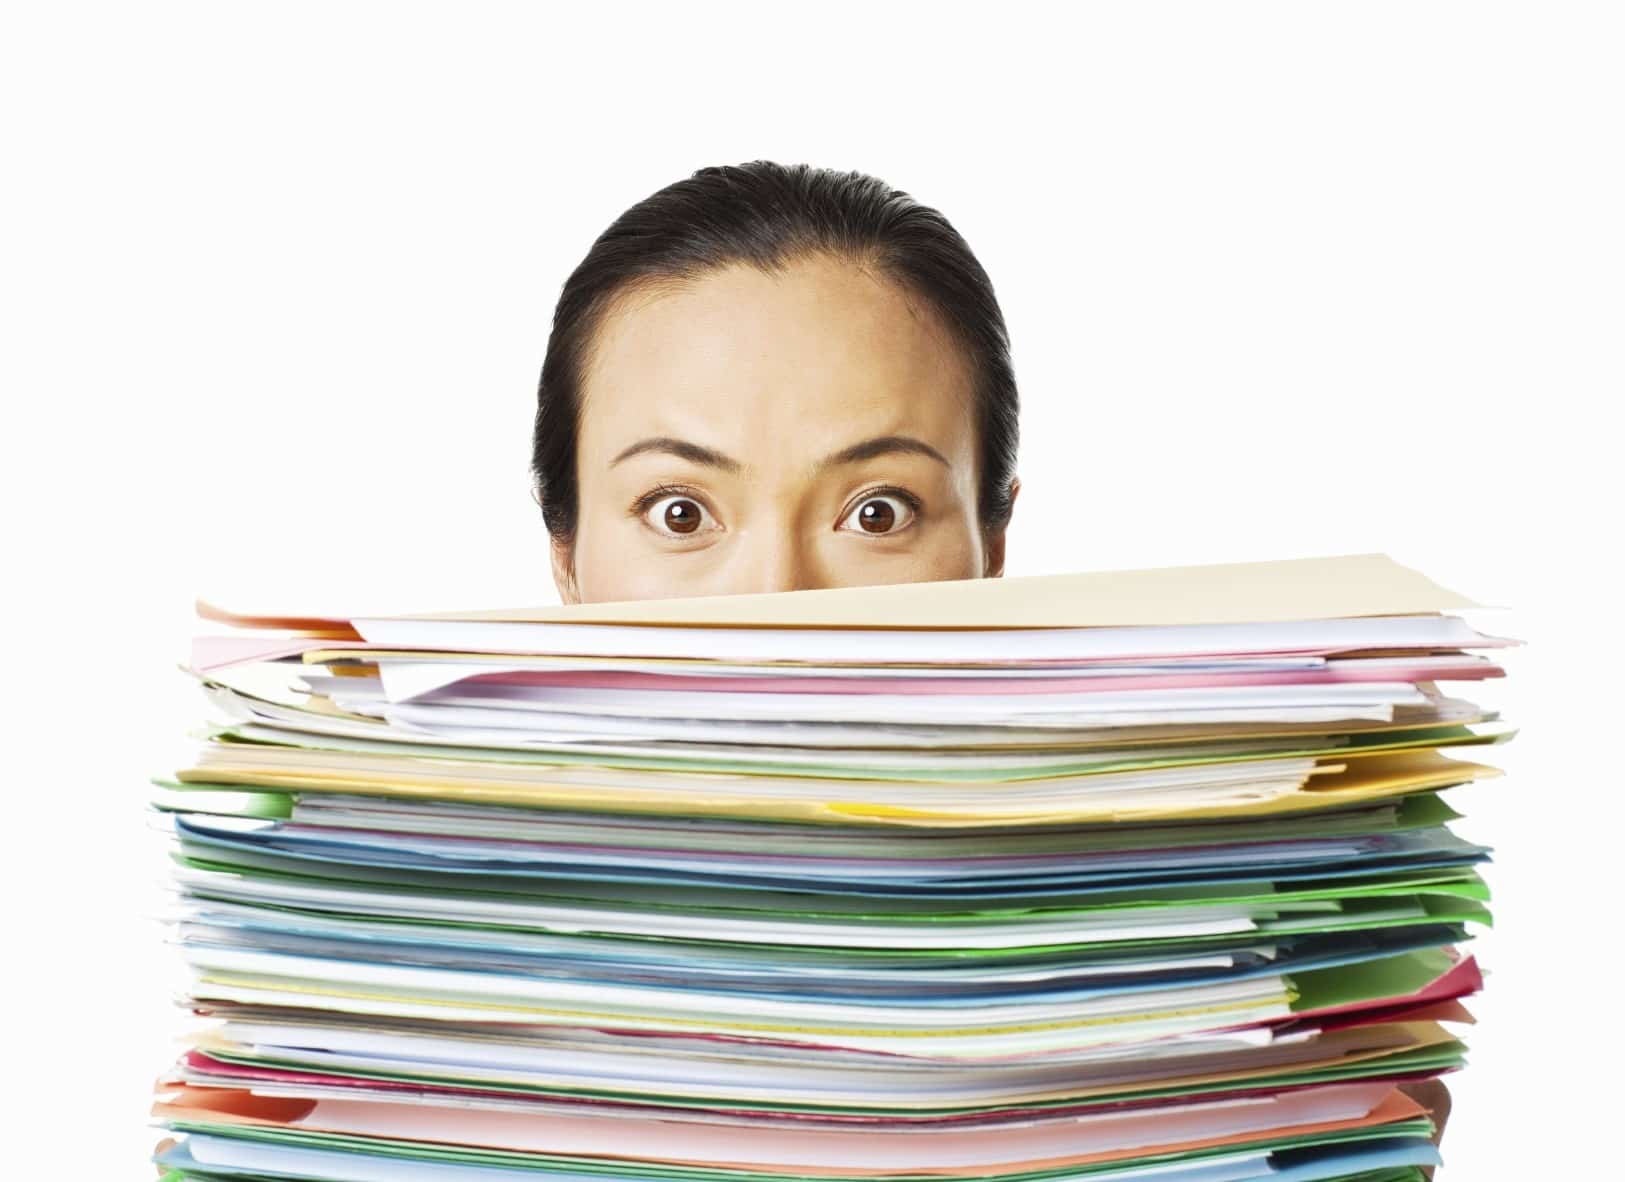 A closeup shot of a female holding files with only her eyes visible